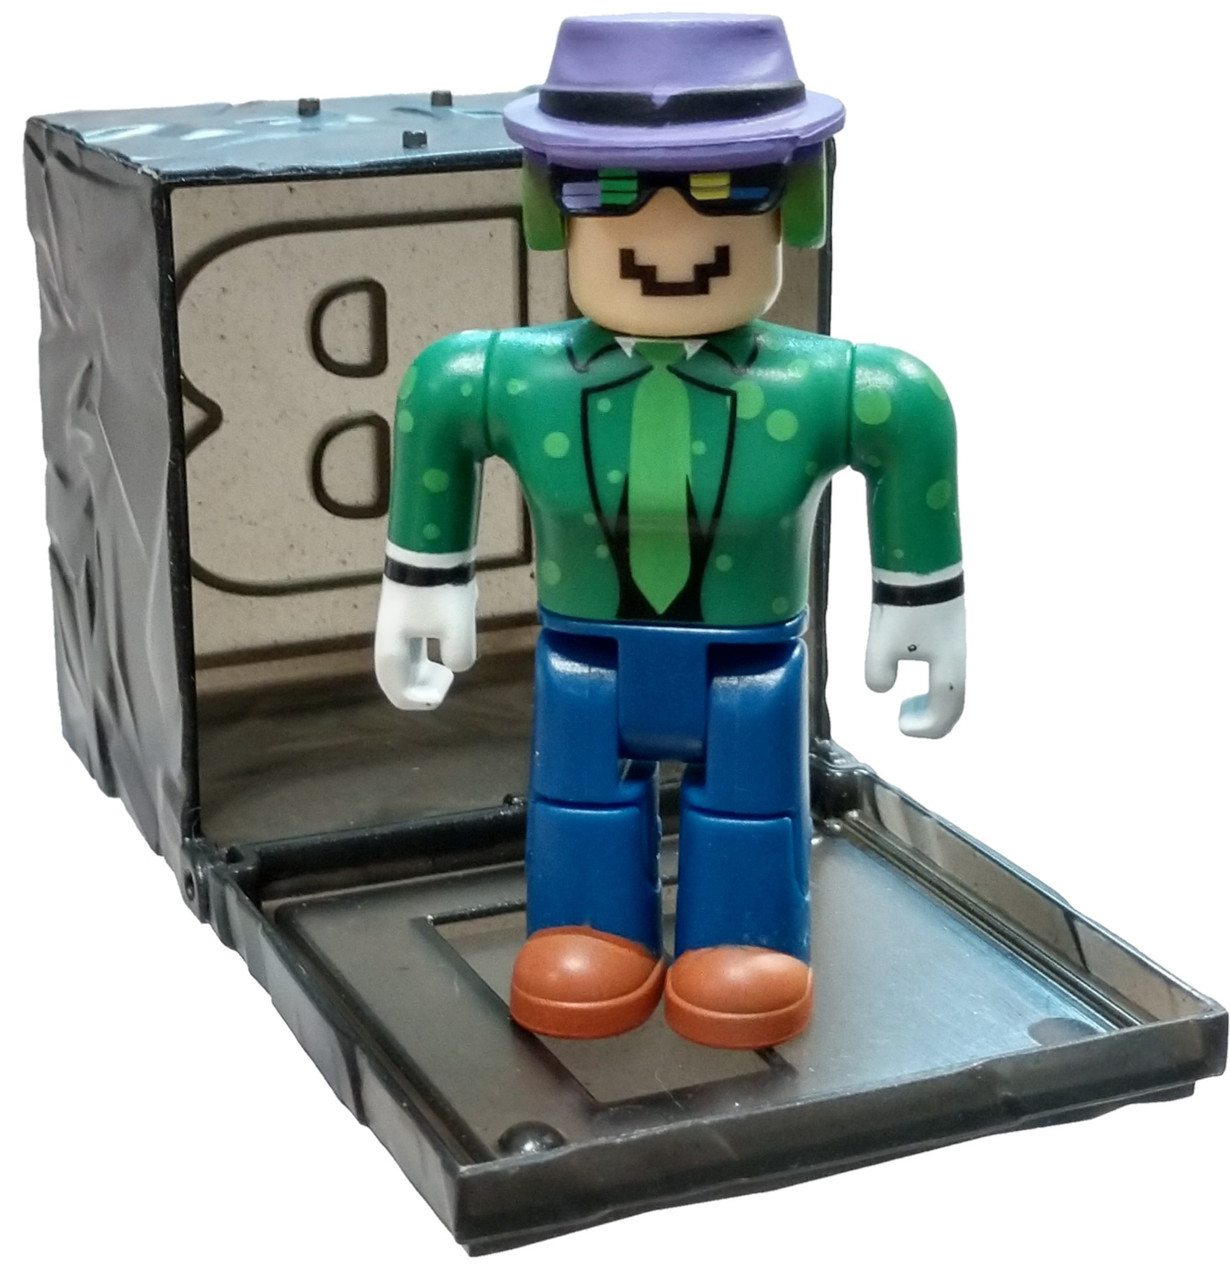 Roblox Series 7 Mrwindy 3 Mini Figure With Black Cube And Online Code Loose Jazwares Toywiz - codes for pokemon universe roblox